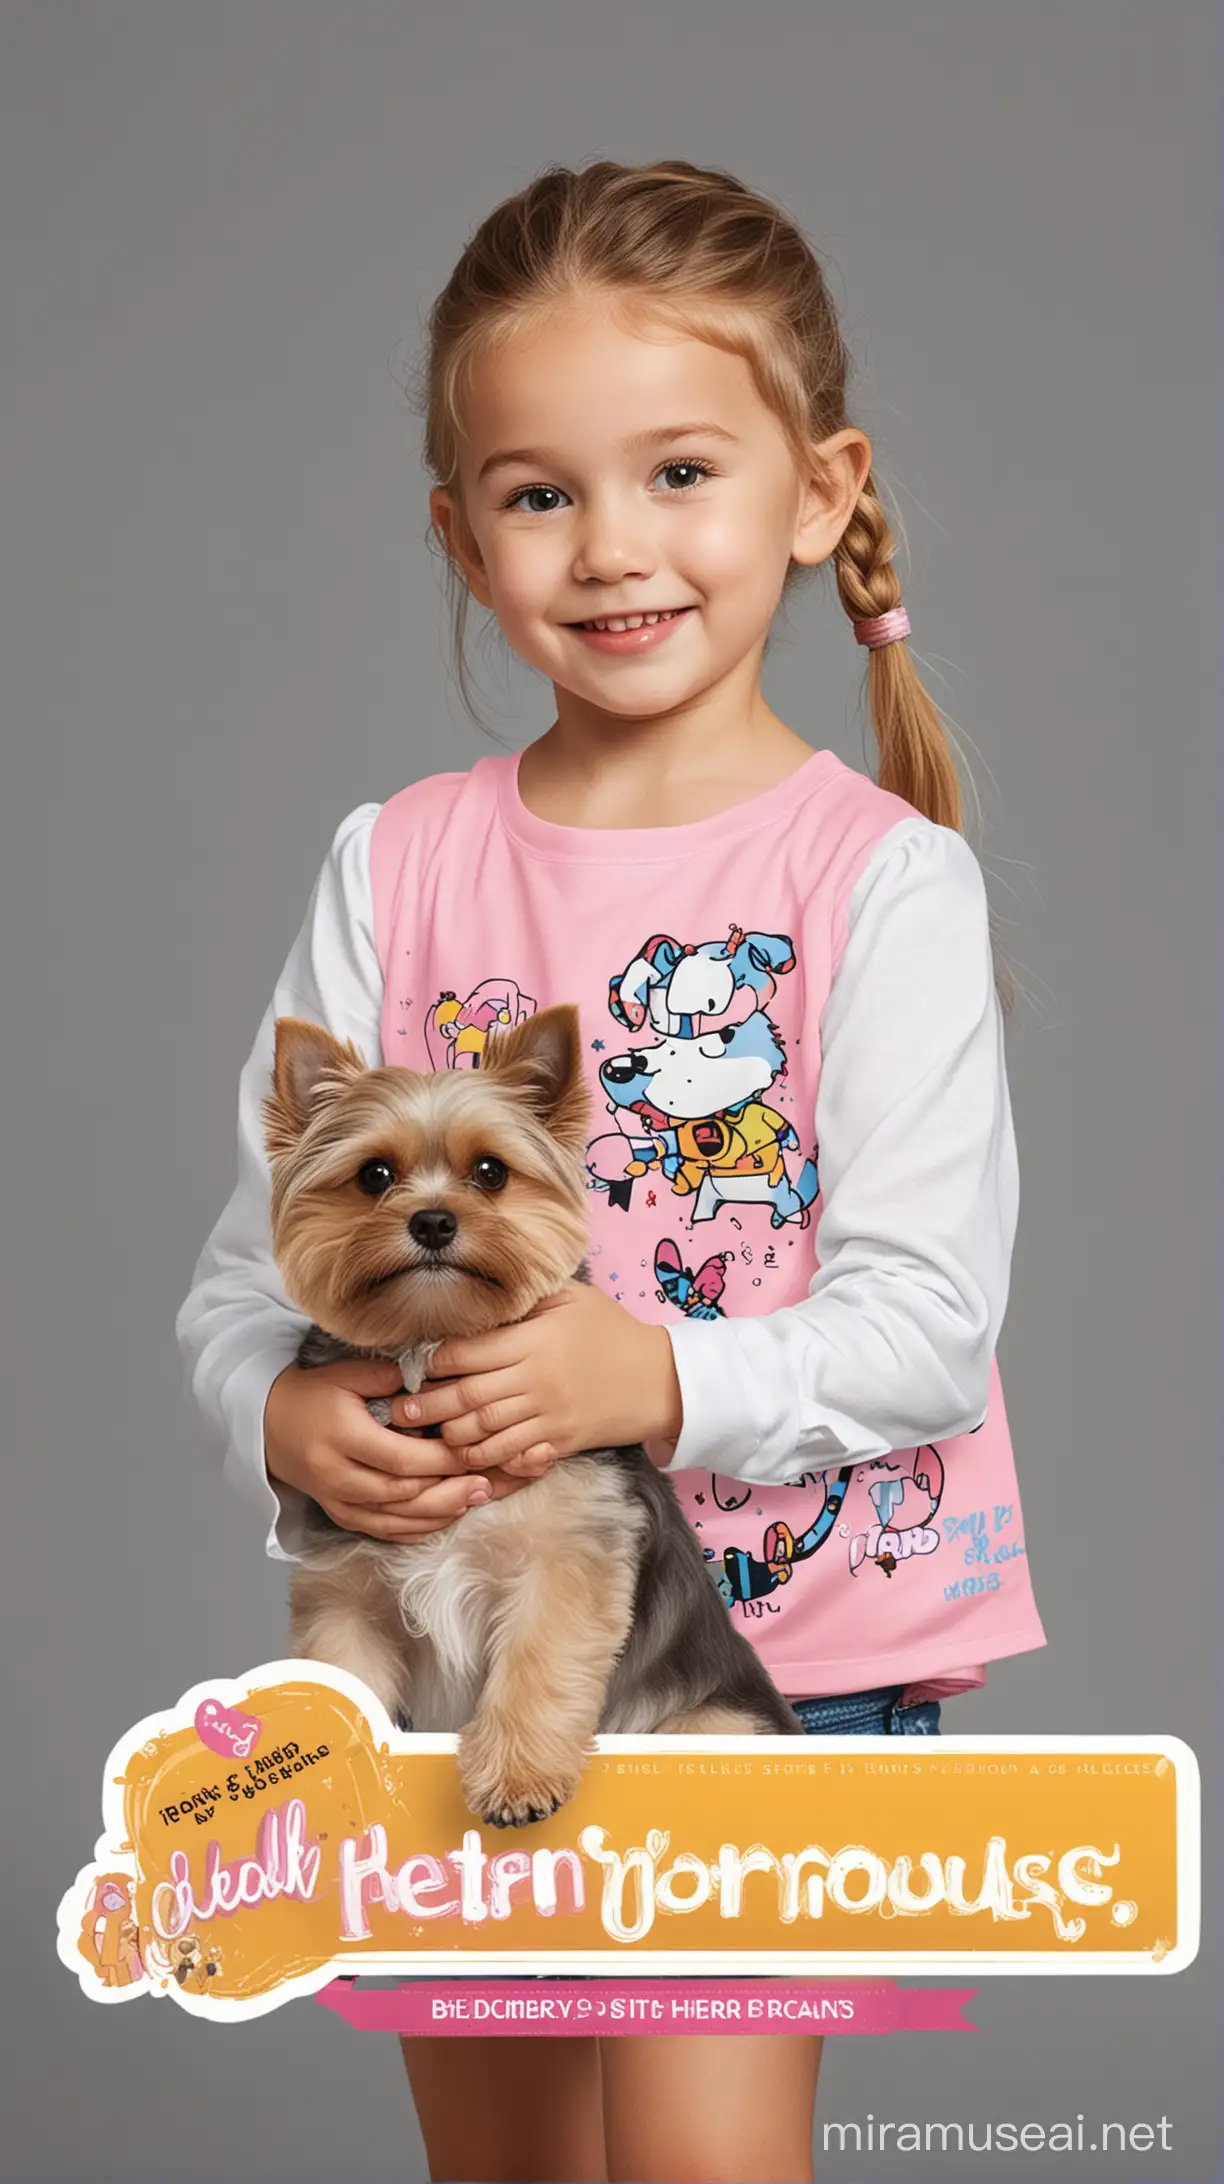 Adorable Kids and Pets in Trendy Fashion Outfits